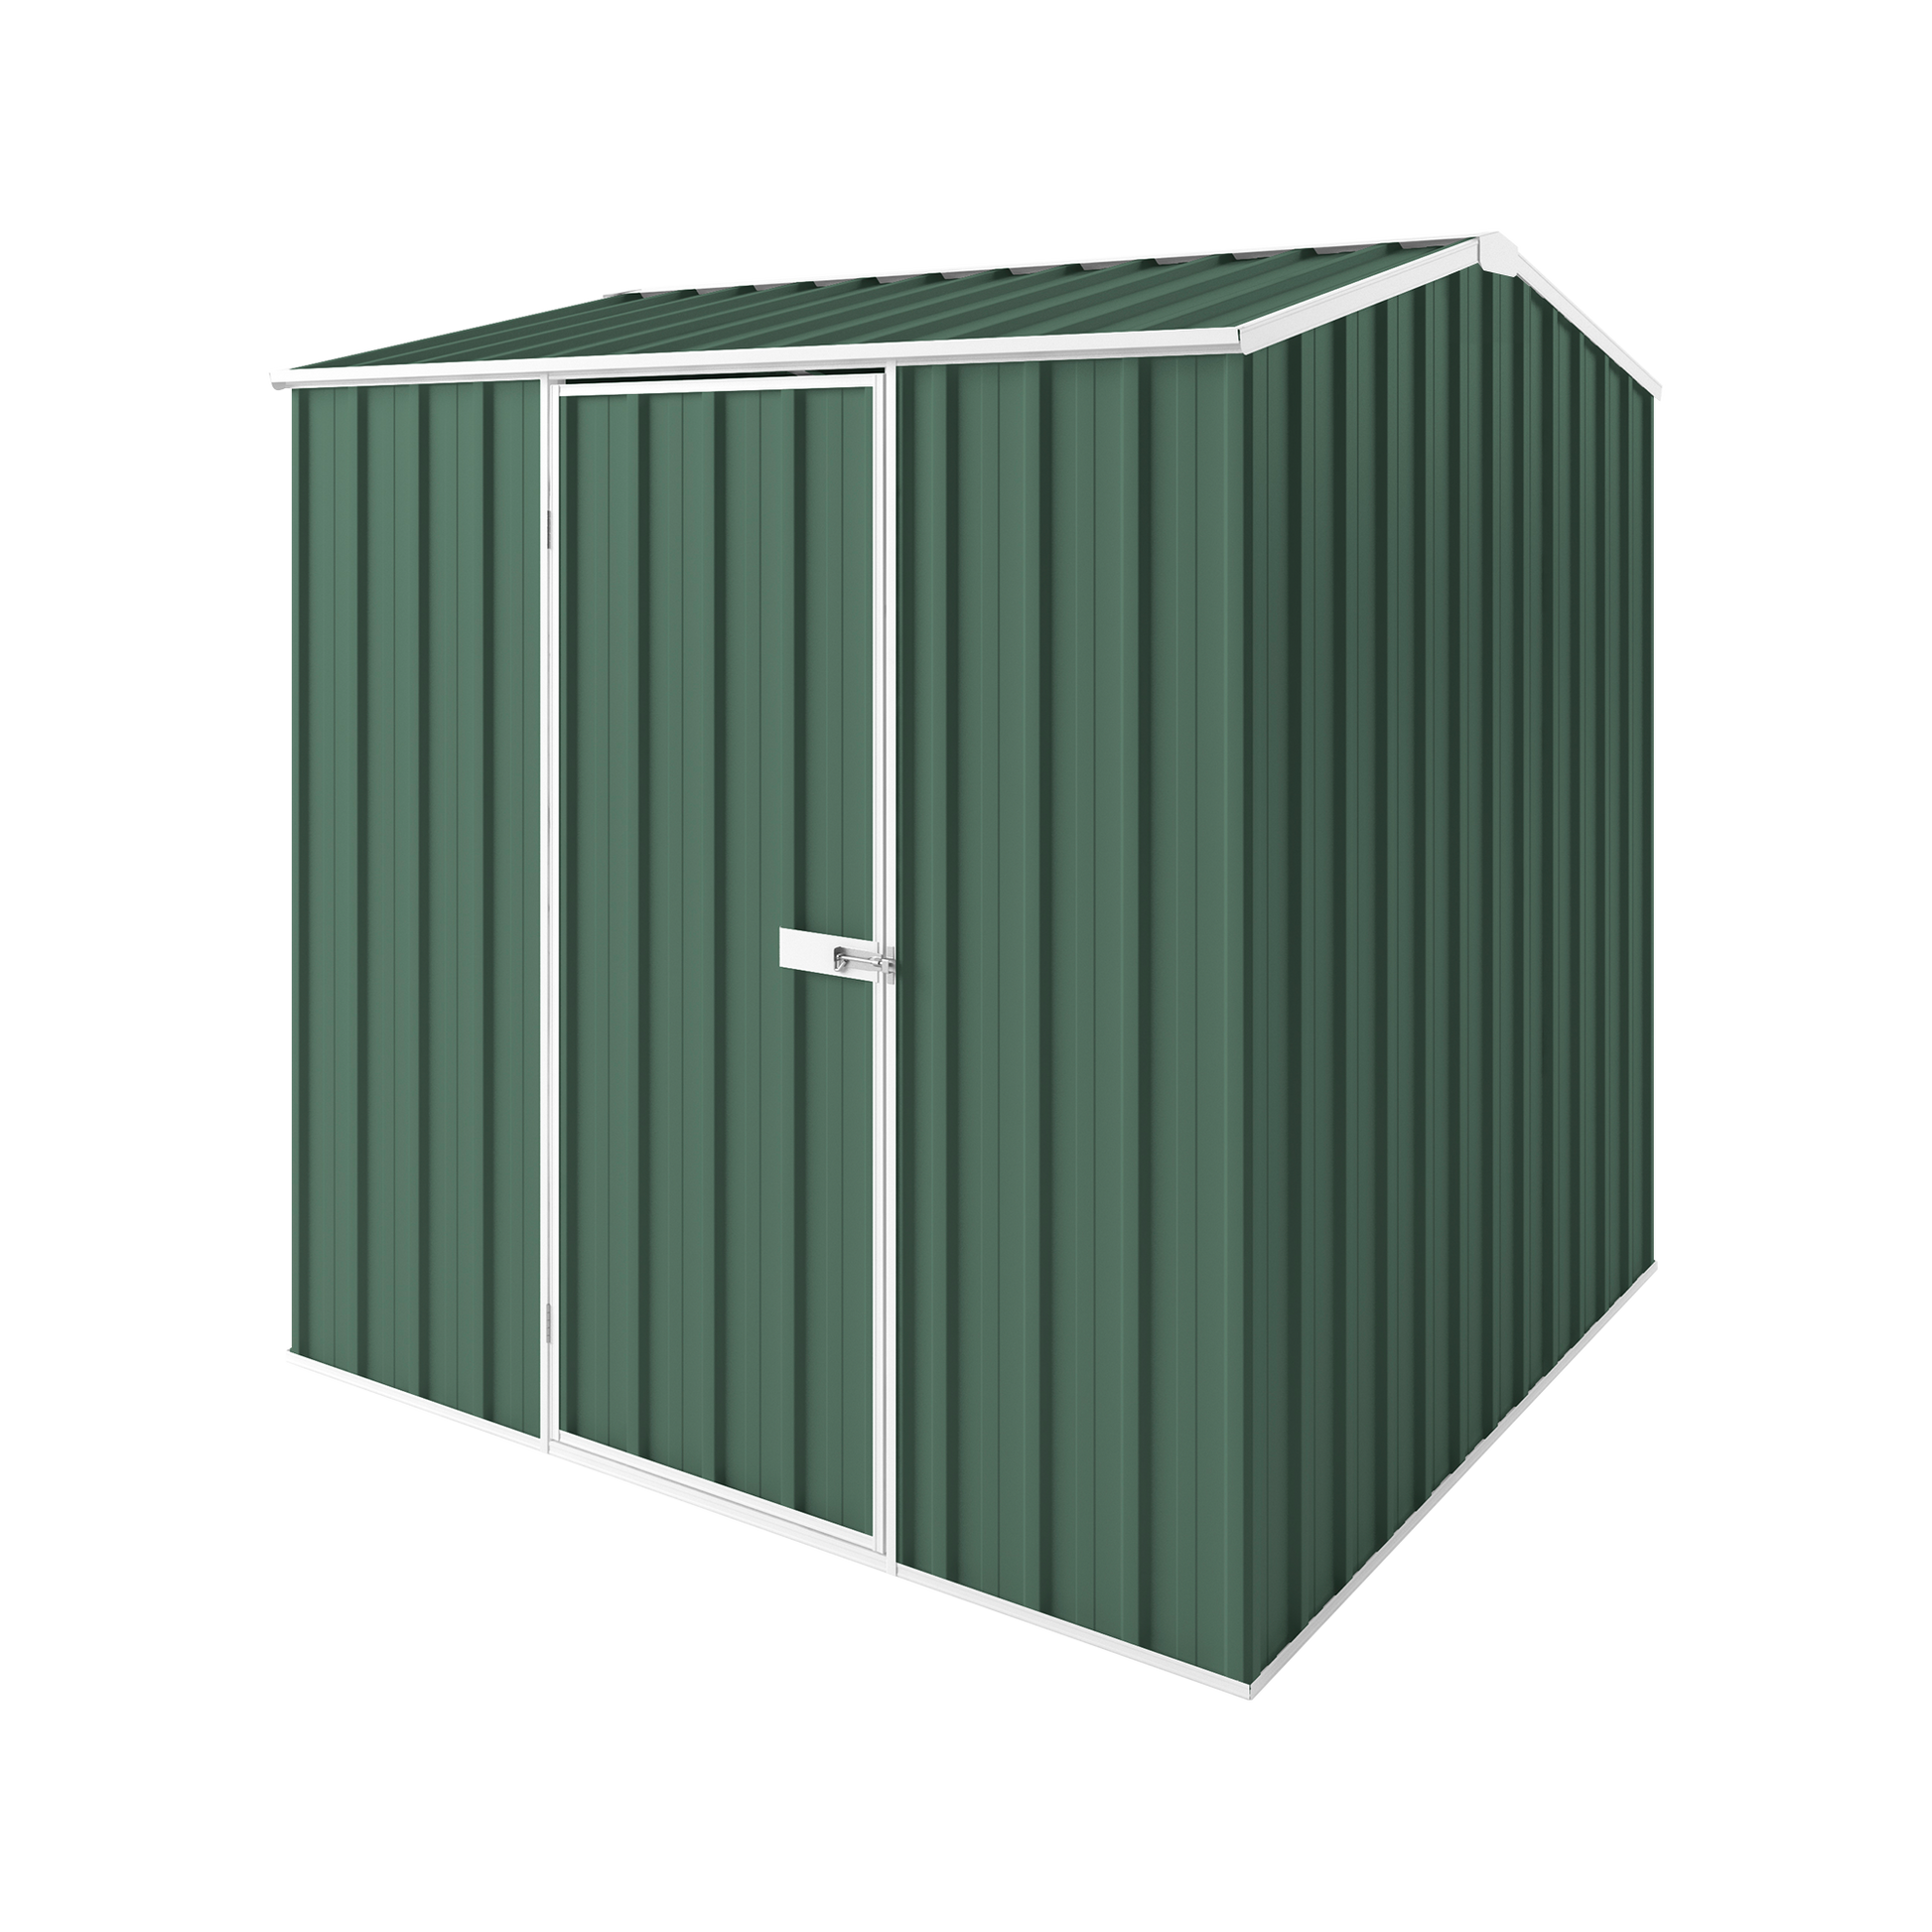 2.25m x 2.25m Gable Roof Garden Shed - EasyShed